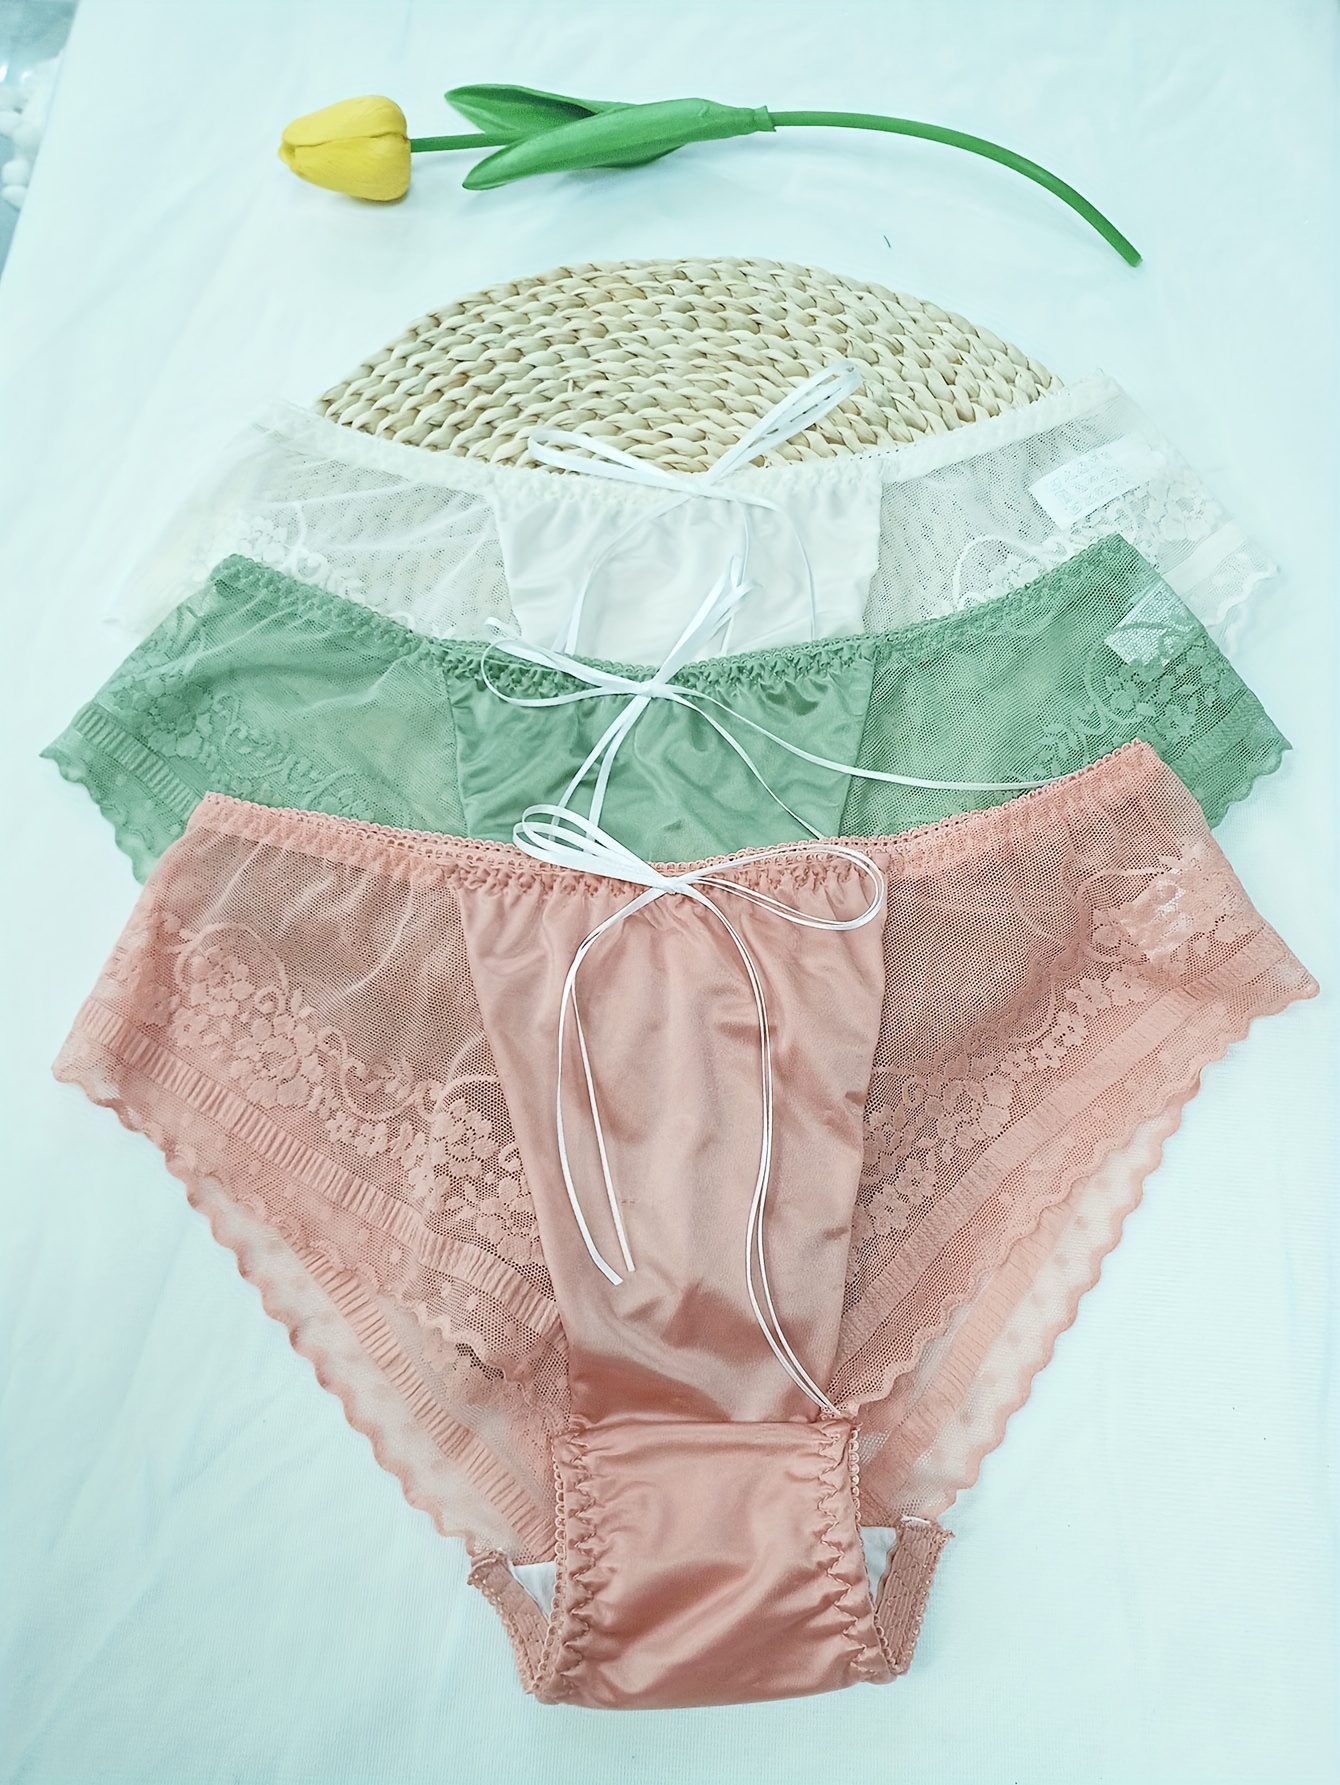 VKME Seamless Cotton Lace Lace Cheeky Panties Comfortable Solid Color  Lingerie For Bikini Briefs And Girls From Fllourishing, $6.09